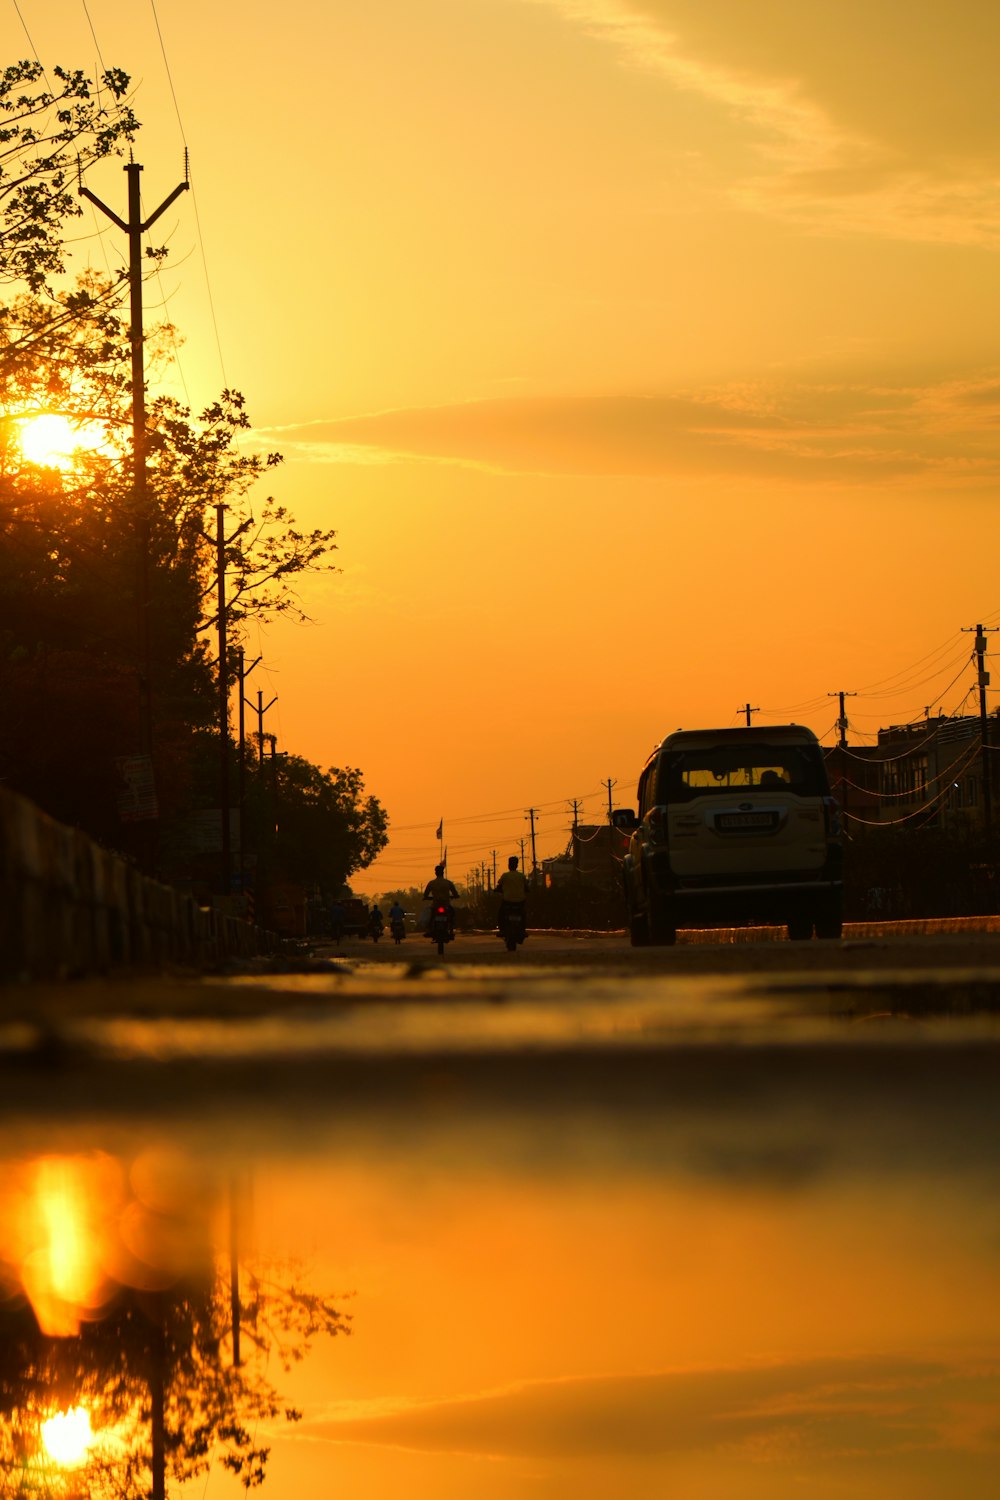 silhouette of cars on road during sunset